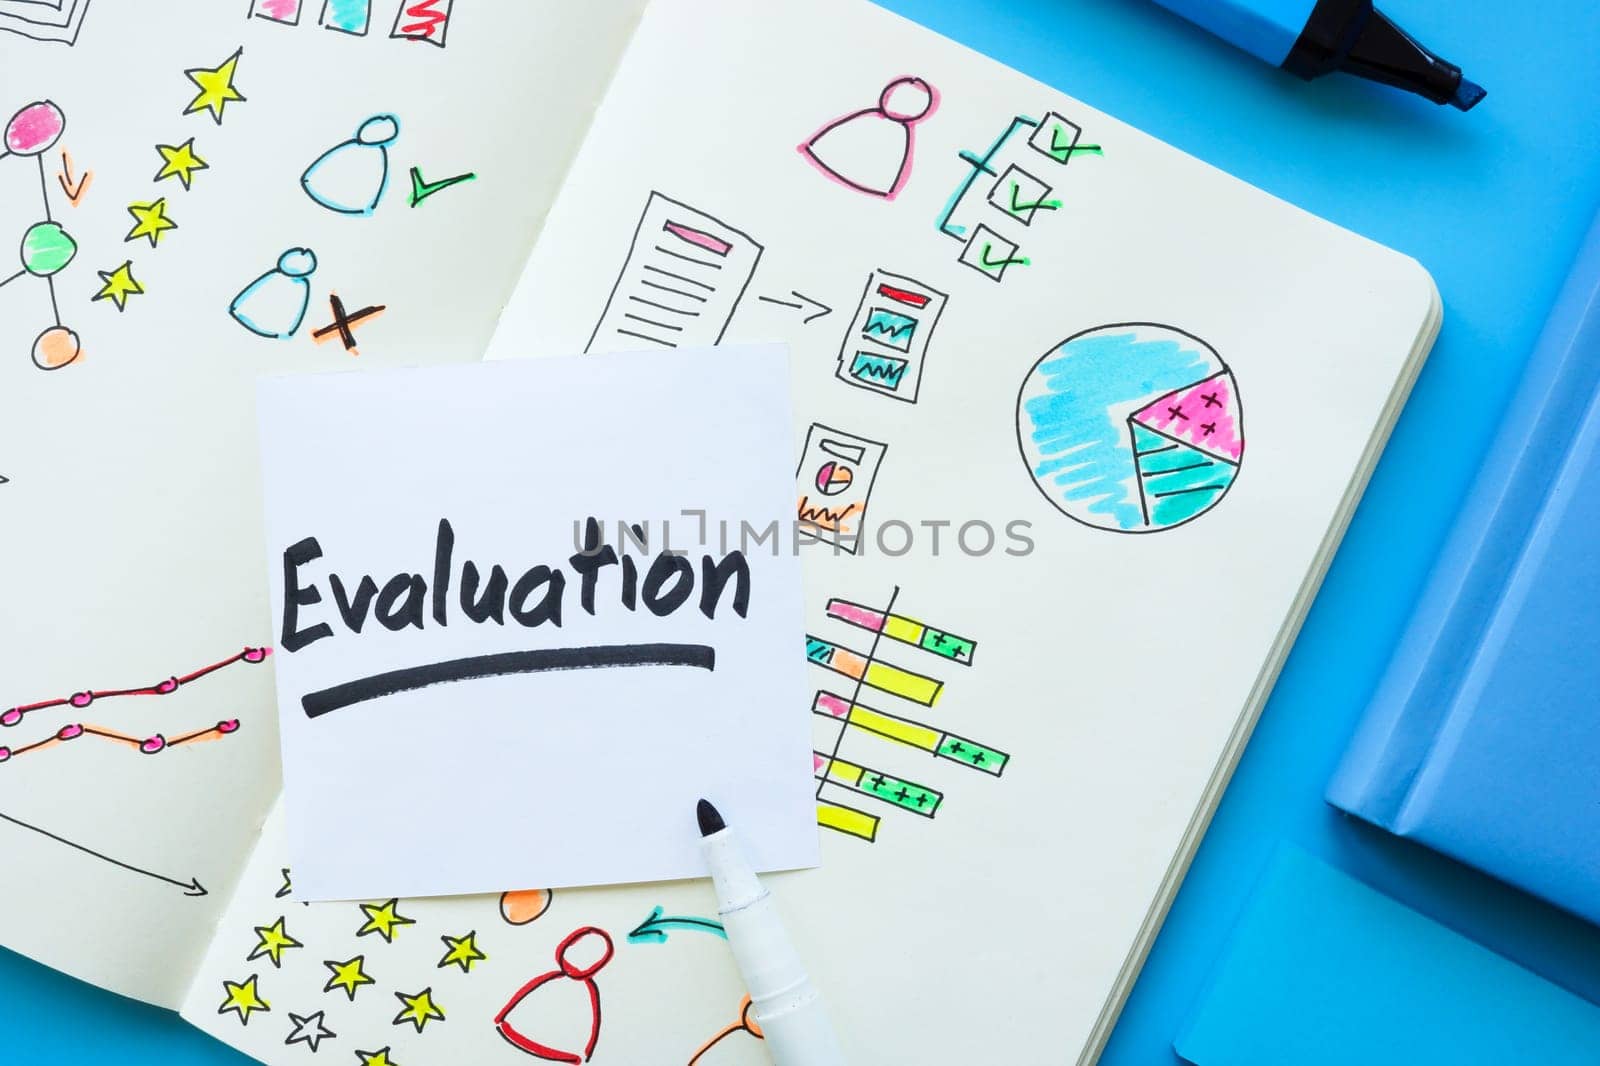 Note with employee assessment charts and word evaluation.